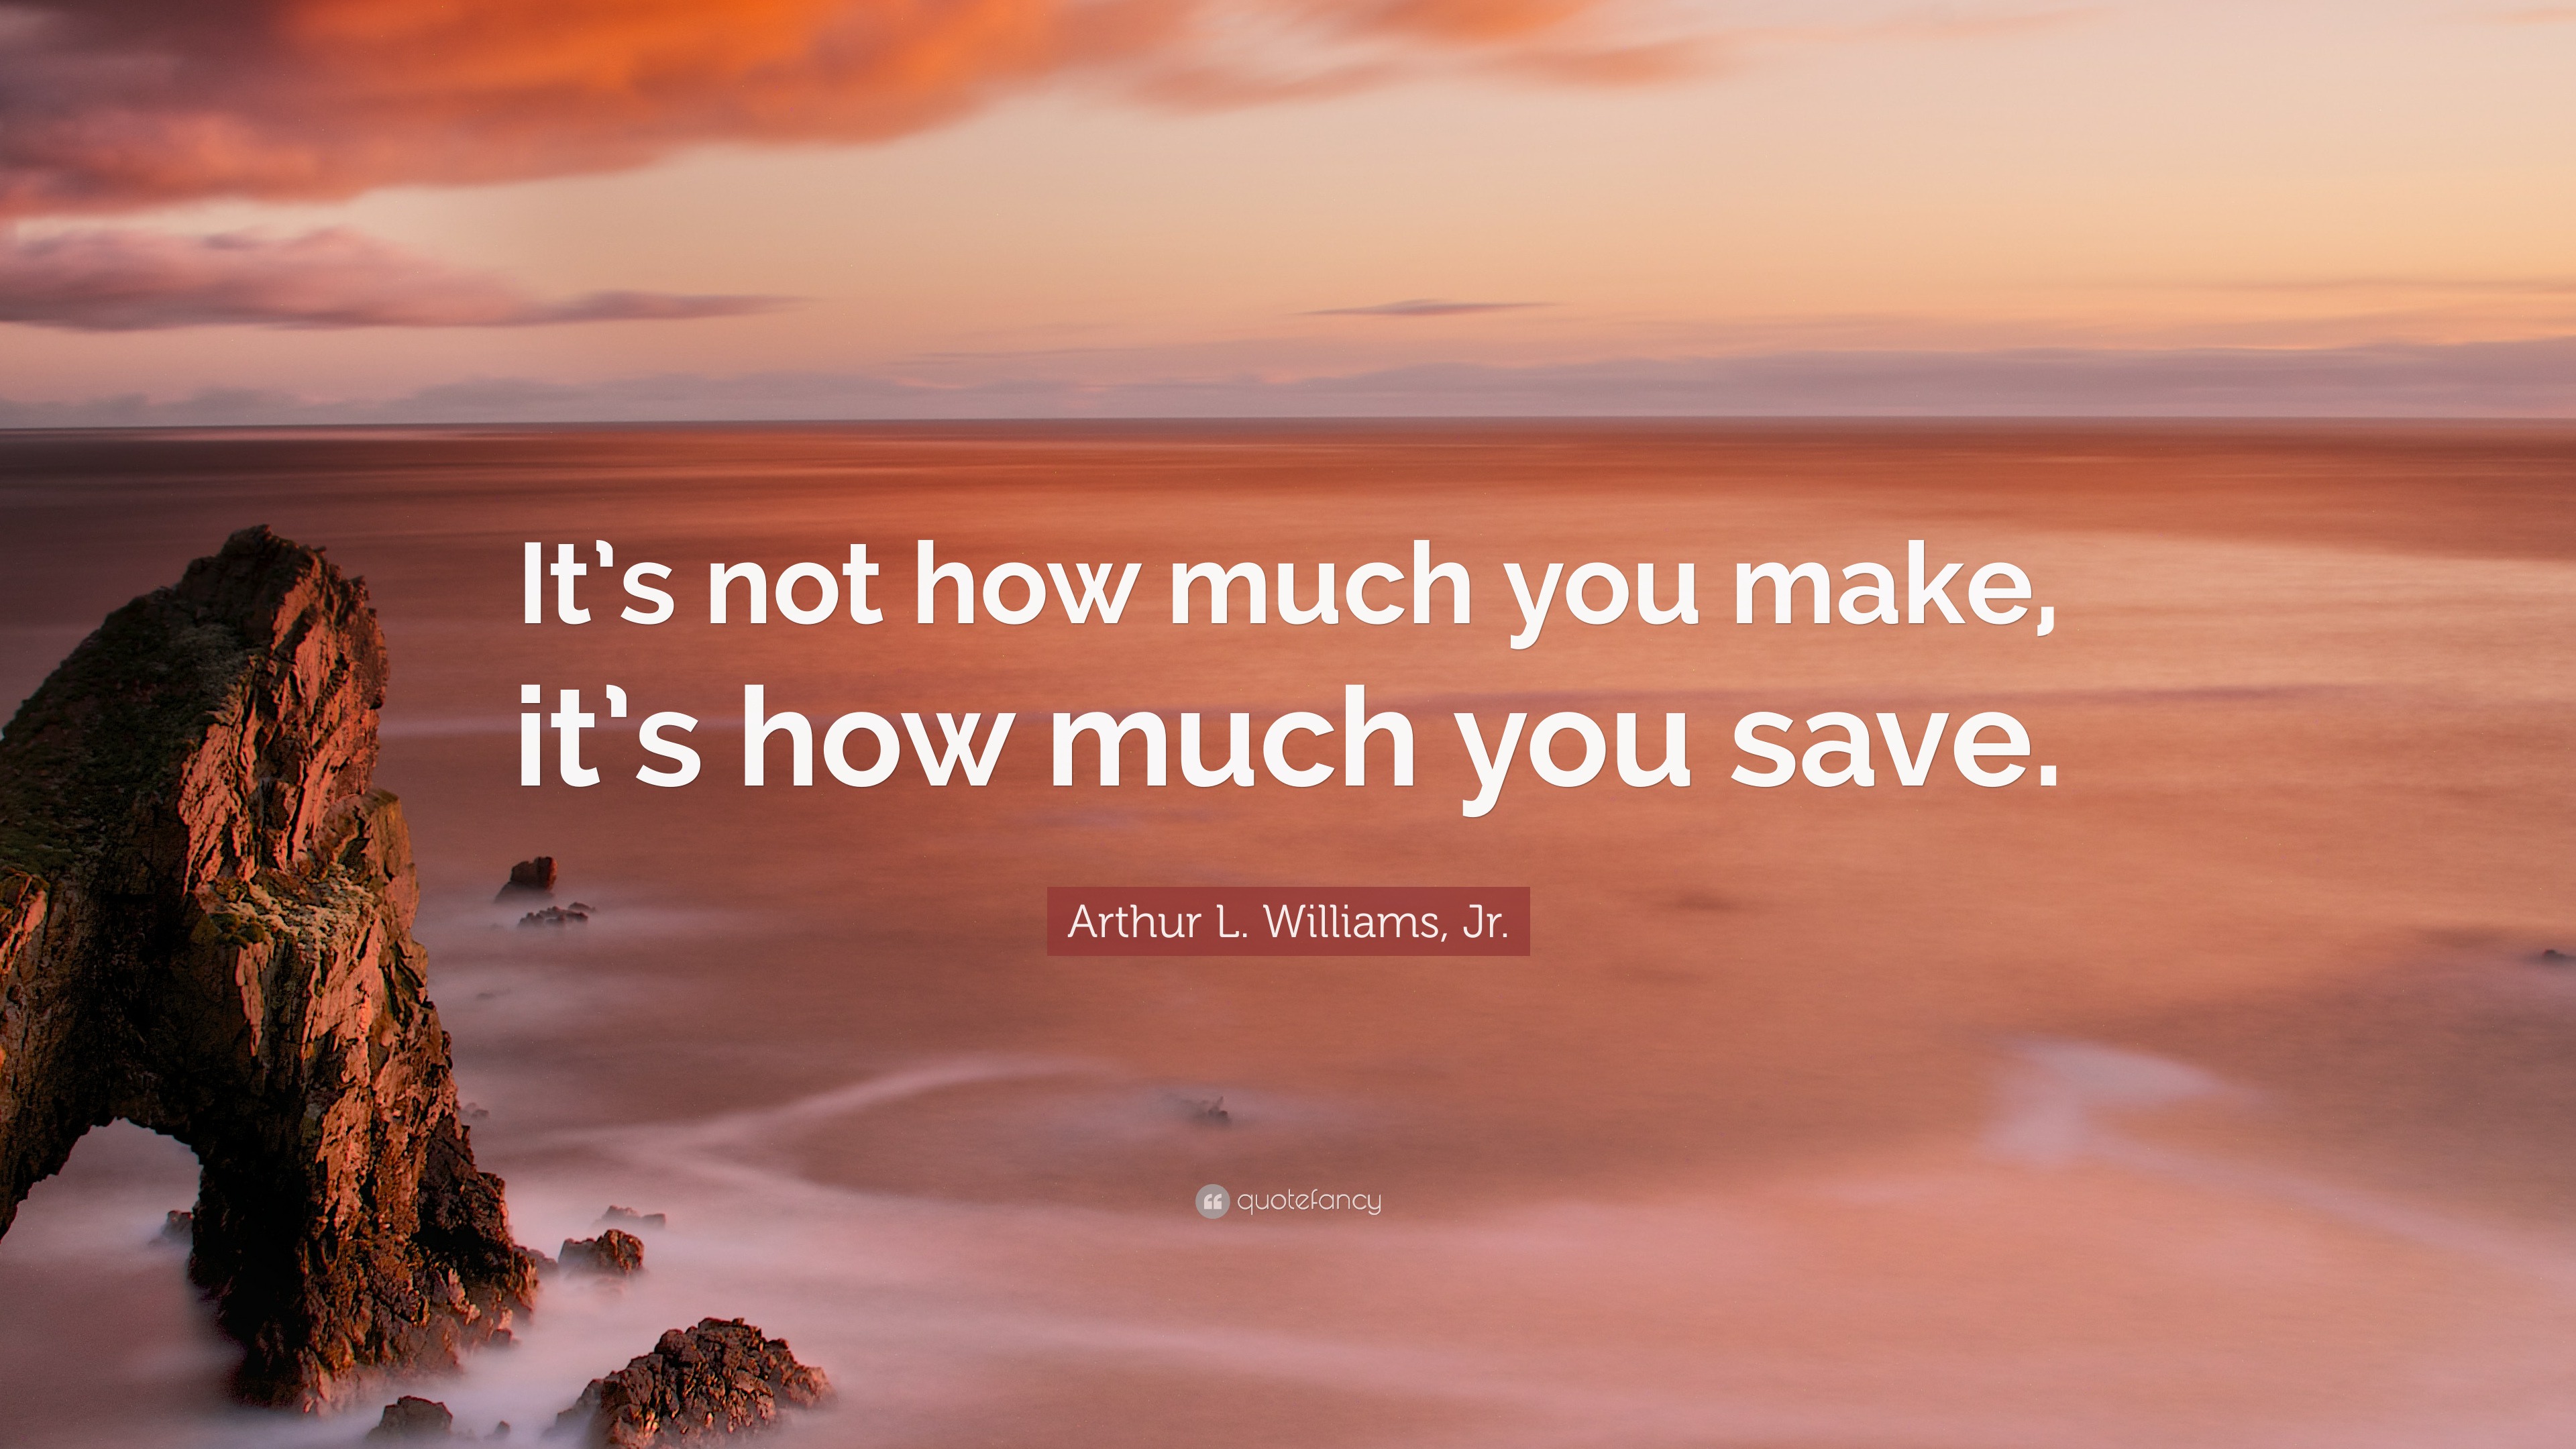 Arthur L Williams Jr Quote “its Not How Much You Make Its How Much You Save” 0642